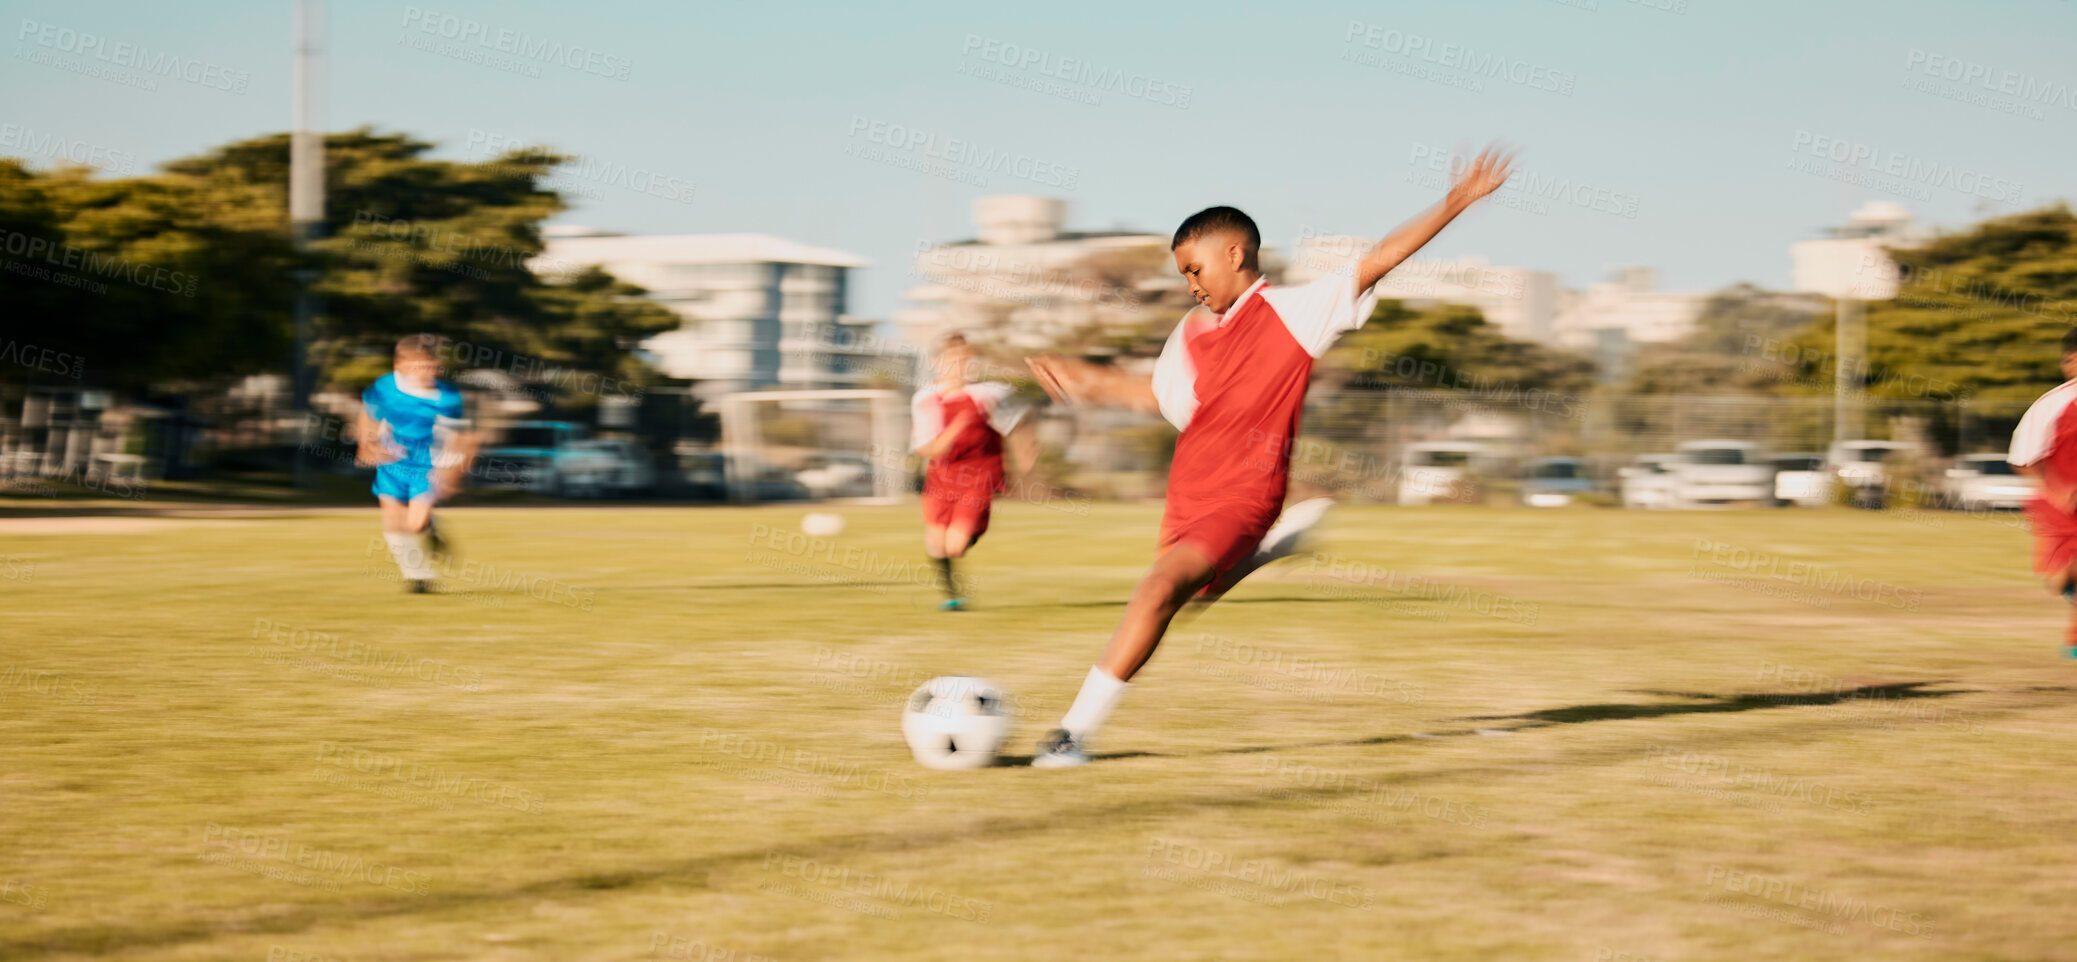 Buy stock photo Sports game, soccer and child shooting, kick or strike ball to score winning goal in contest, competition or match. Fitness workout, training exercise or youth soccer player playing on football field